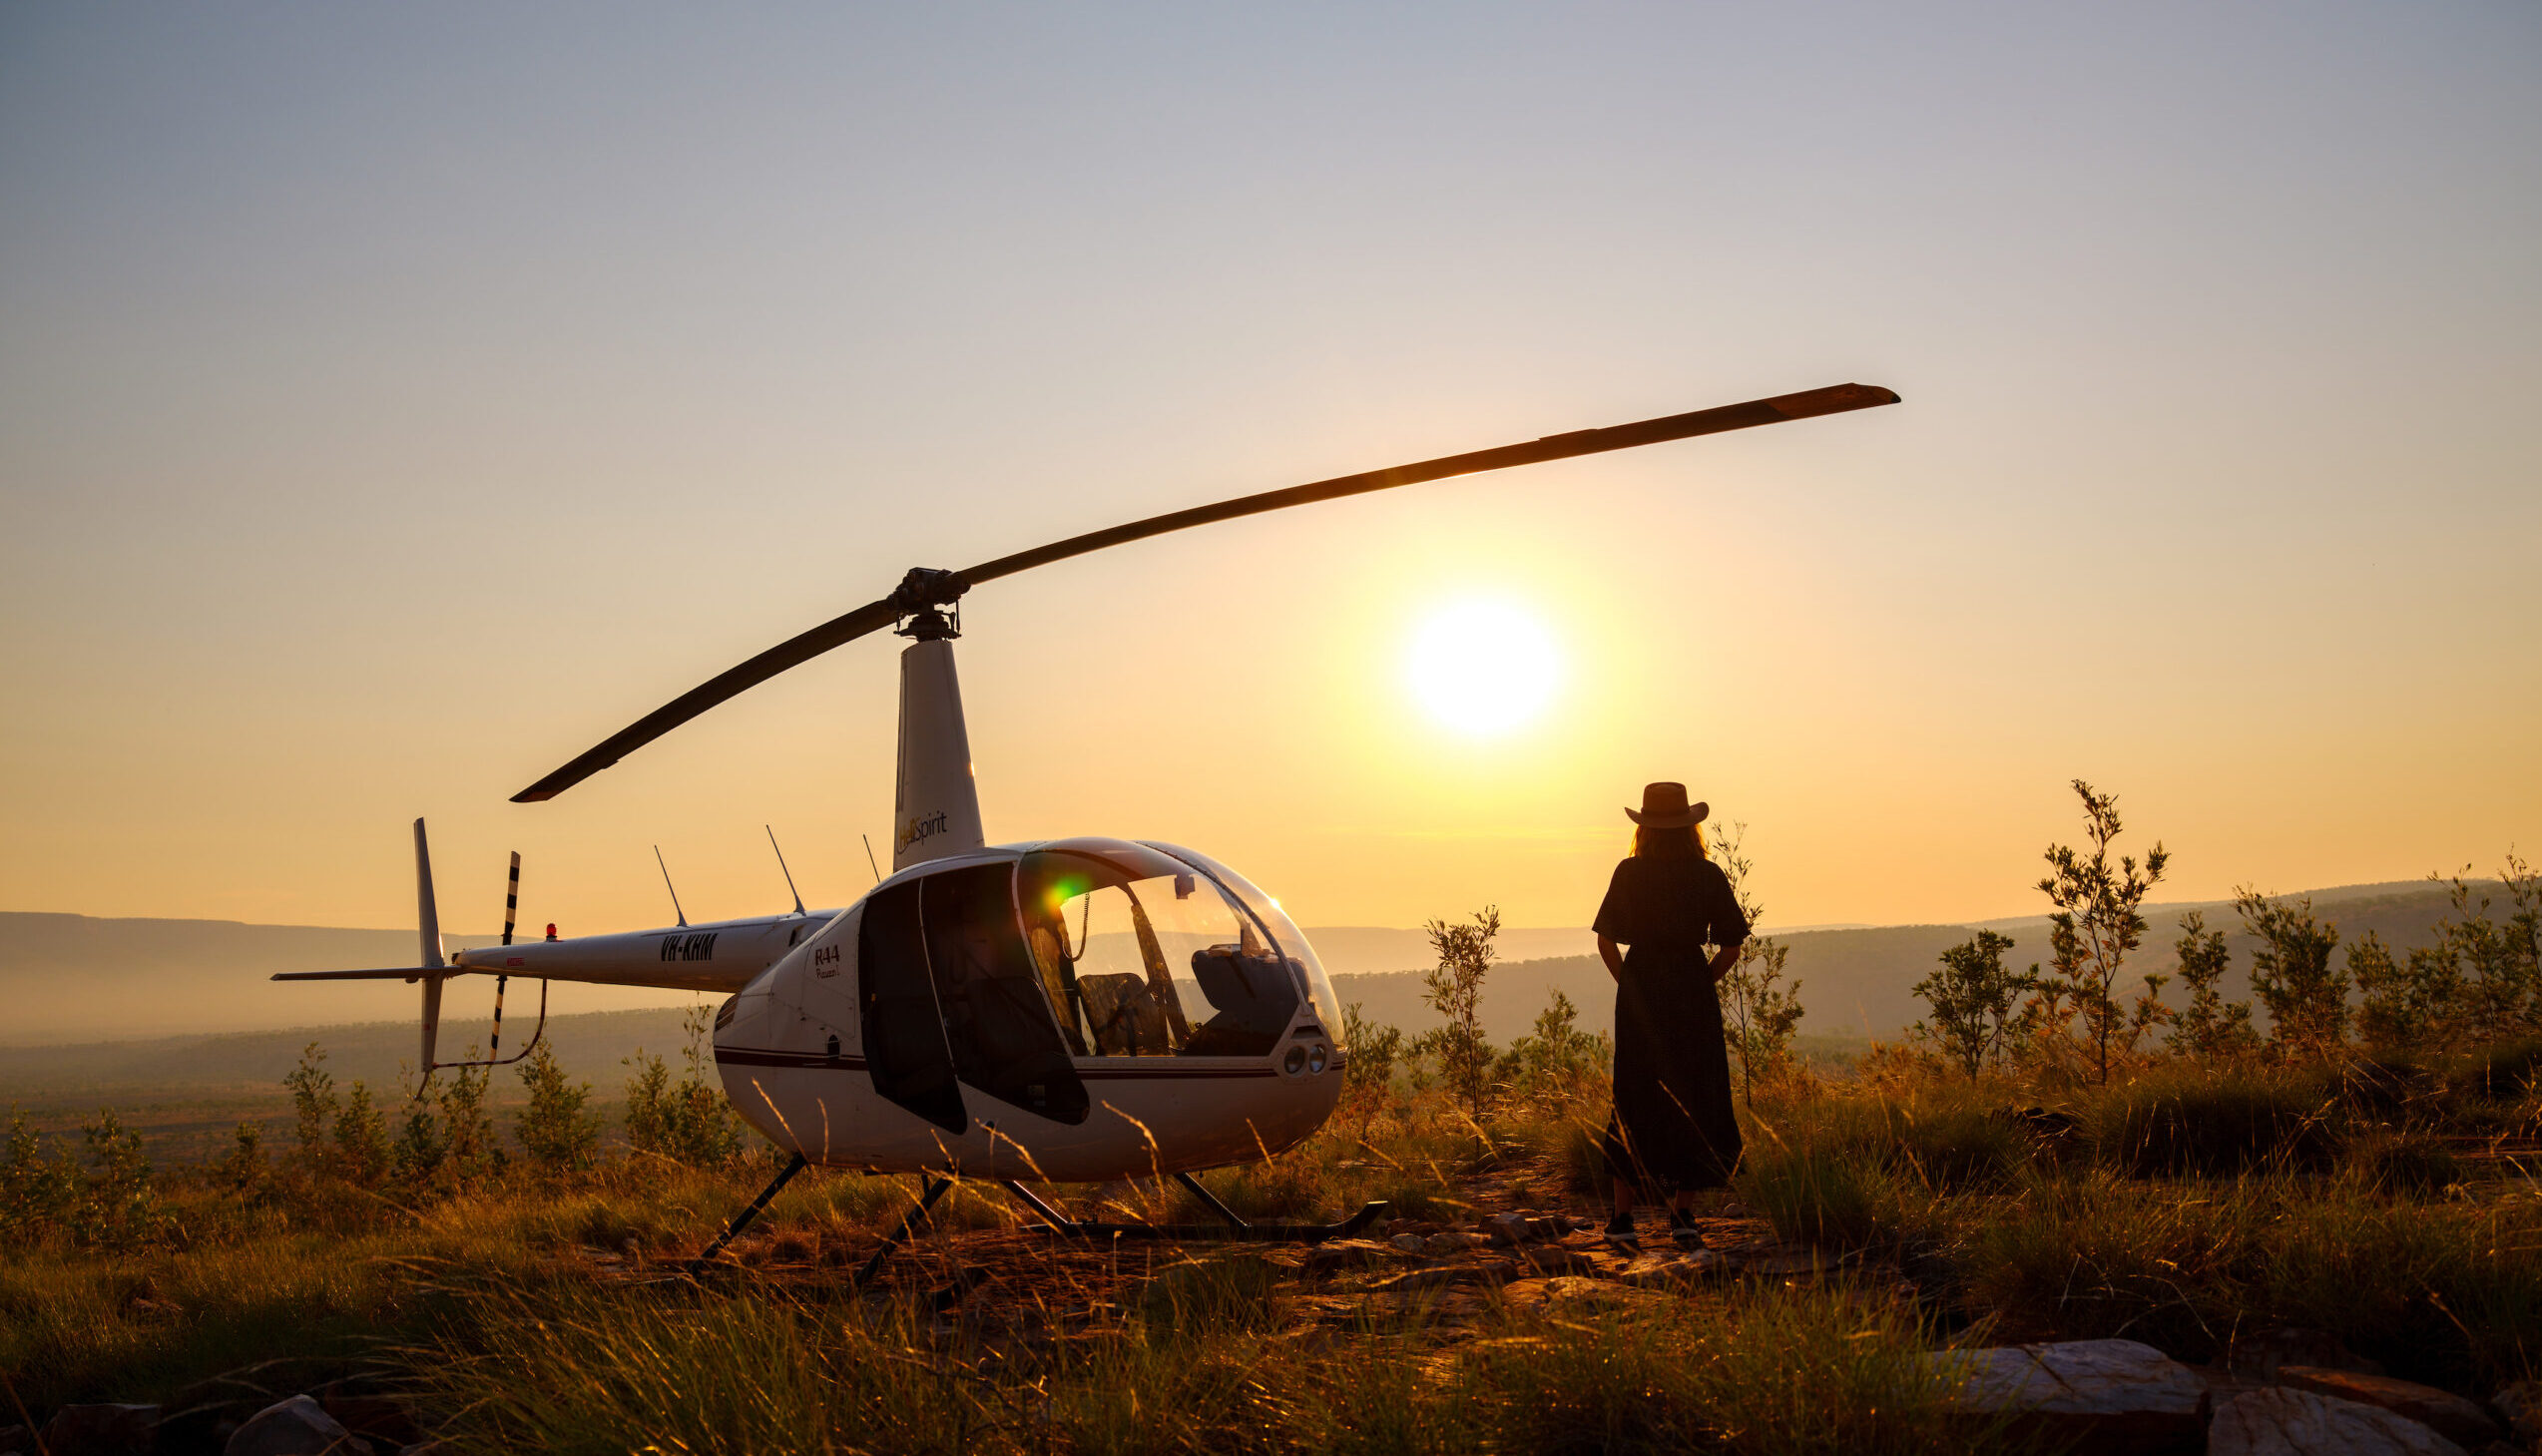 Helicopter with lady watching the sunset at El Questro